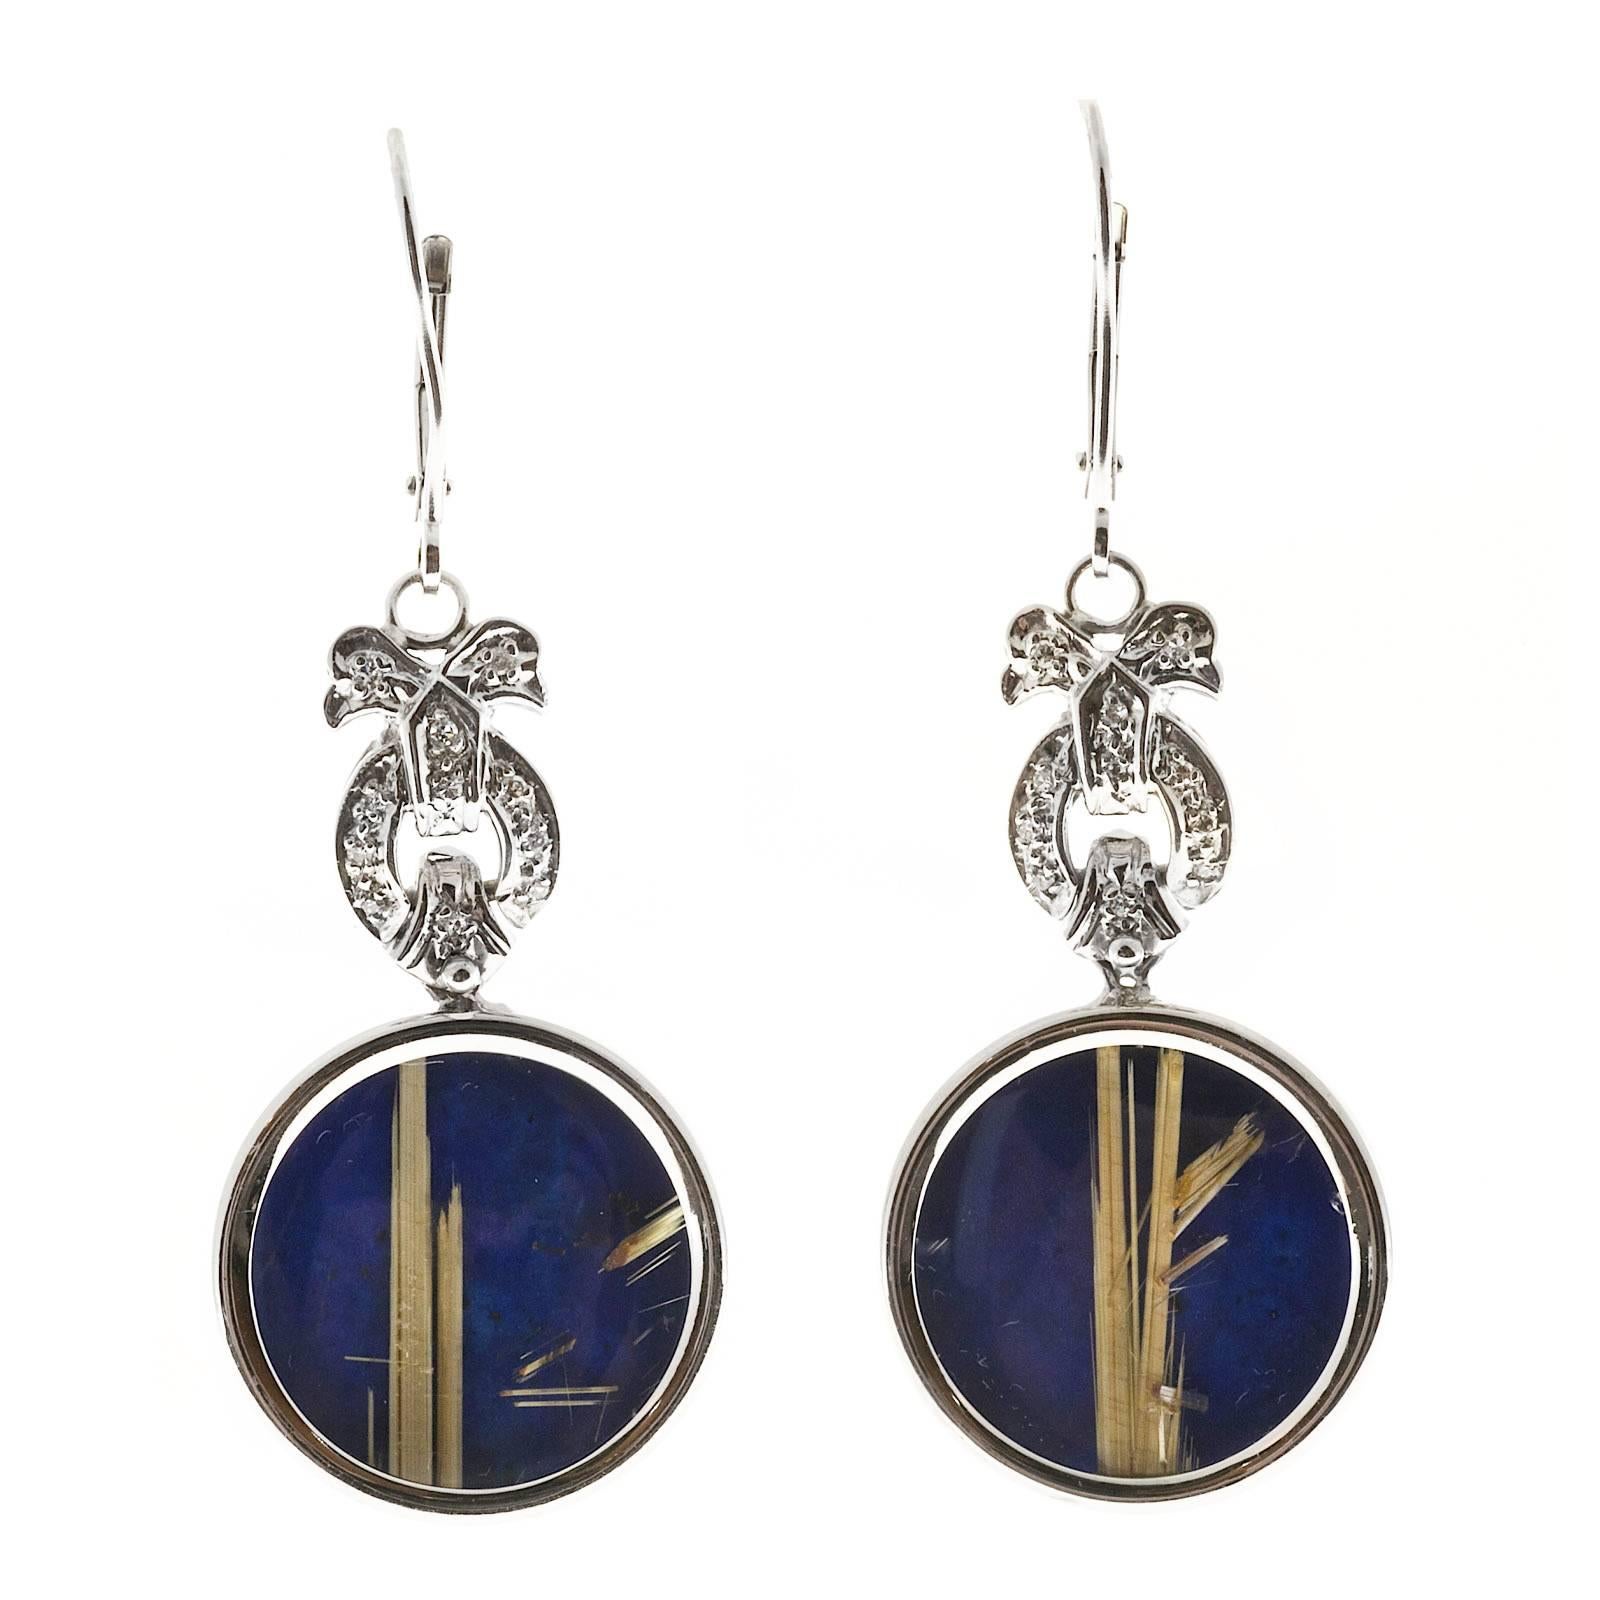 Peter Suchy Lapis 14k white gold dangle earrings. Euro wire tops bow motif.  Dangle section which is hinged at the bottom is very unique pair of genuine stones. The back layer of each stone is genuine untreated bright blue Lapis. On top of that is a